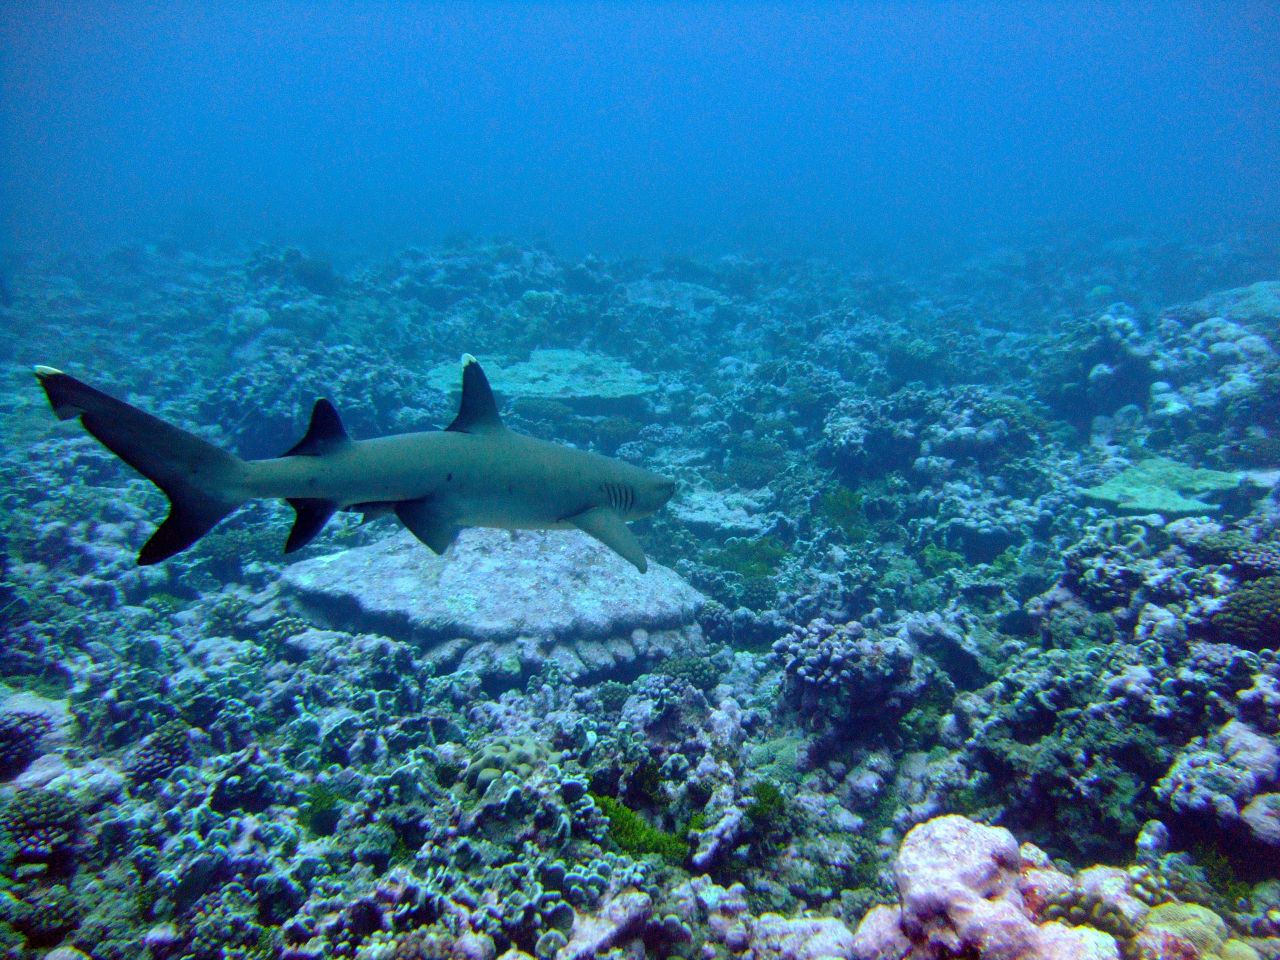 A whitetip reef shark at Palmyra Atoll. Lead author of the study Marc Nadon said: "Reef shark numbers were greatly depressed compared to reefs in the same regions that were simply further away from humans."